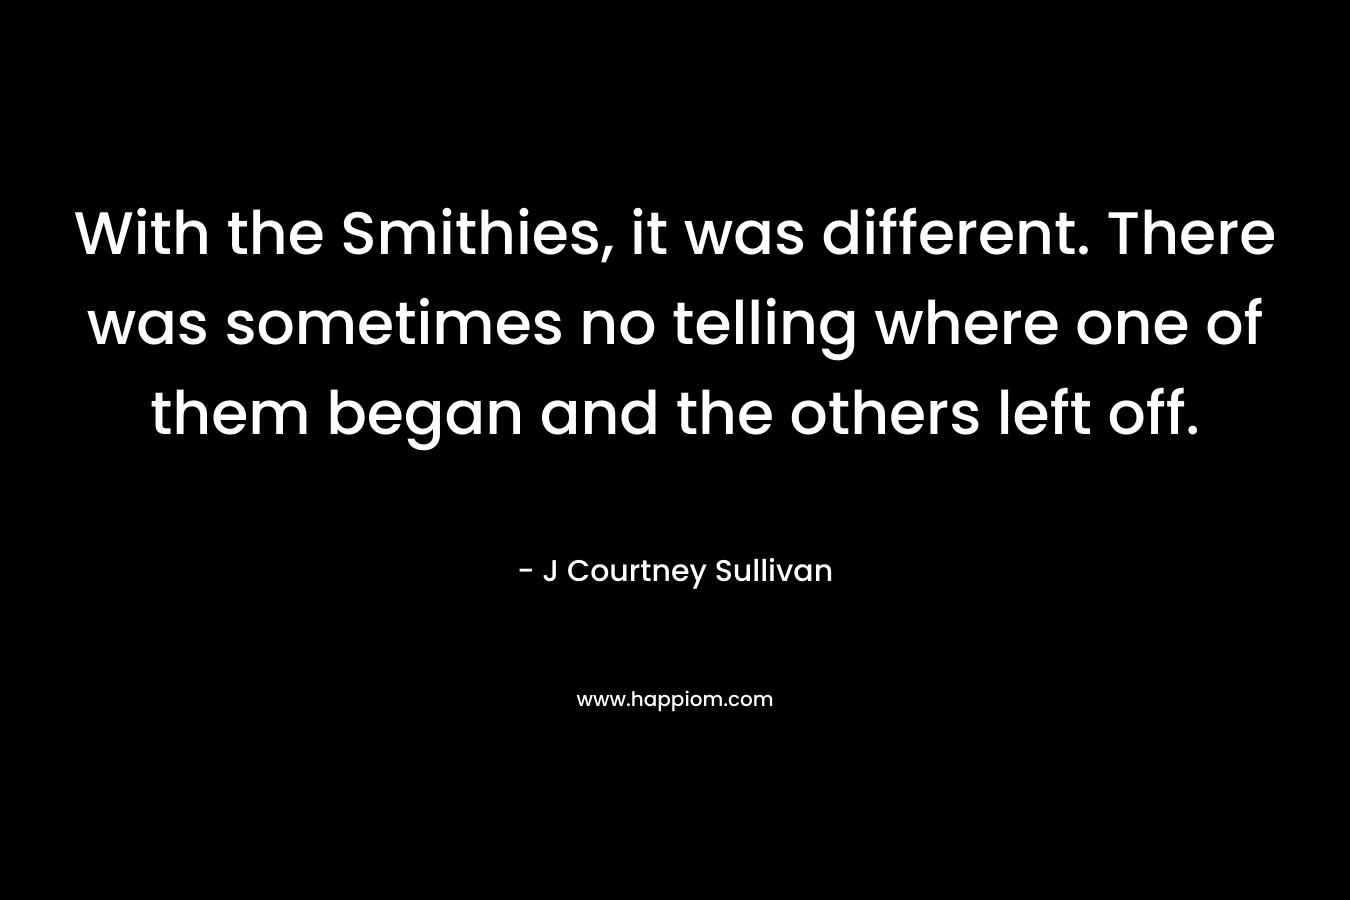 With the Smithies, it was different. There was sometimes no telling where one of them began and the others left off. – J Courtney Sullivan